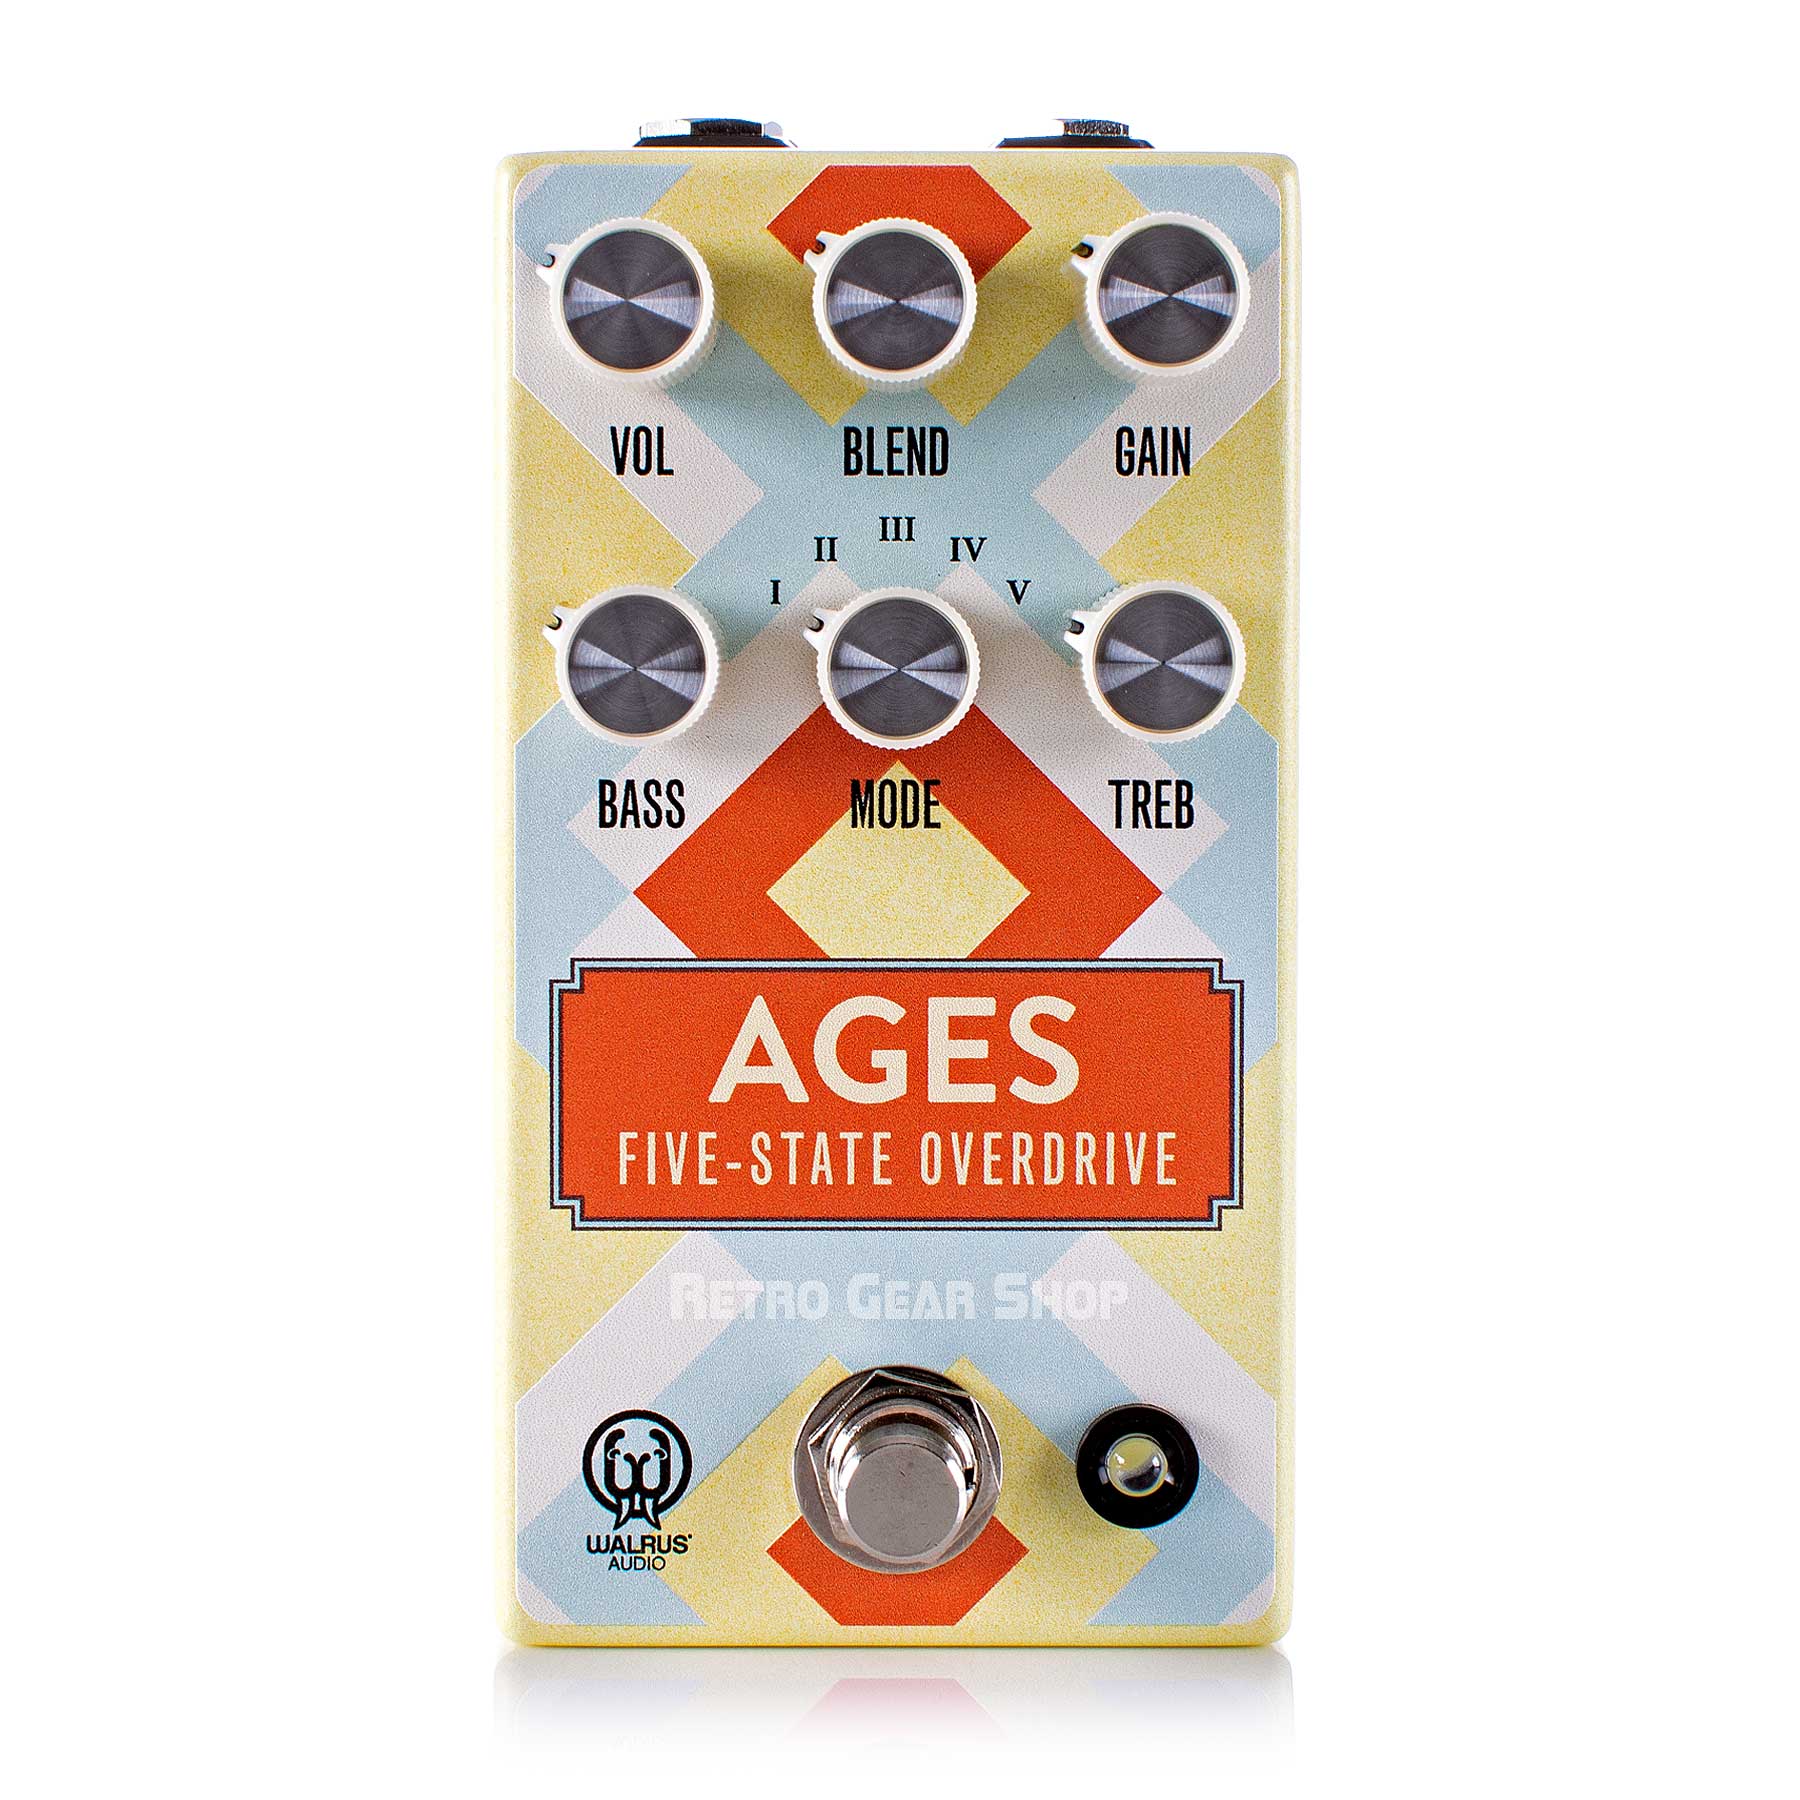 Walrus Audio Ages Five-State Overdrive Distortion Santa Fe Guitar